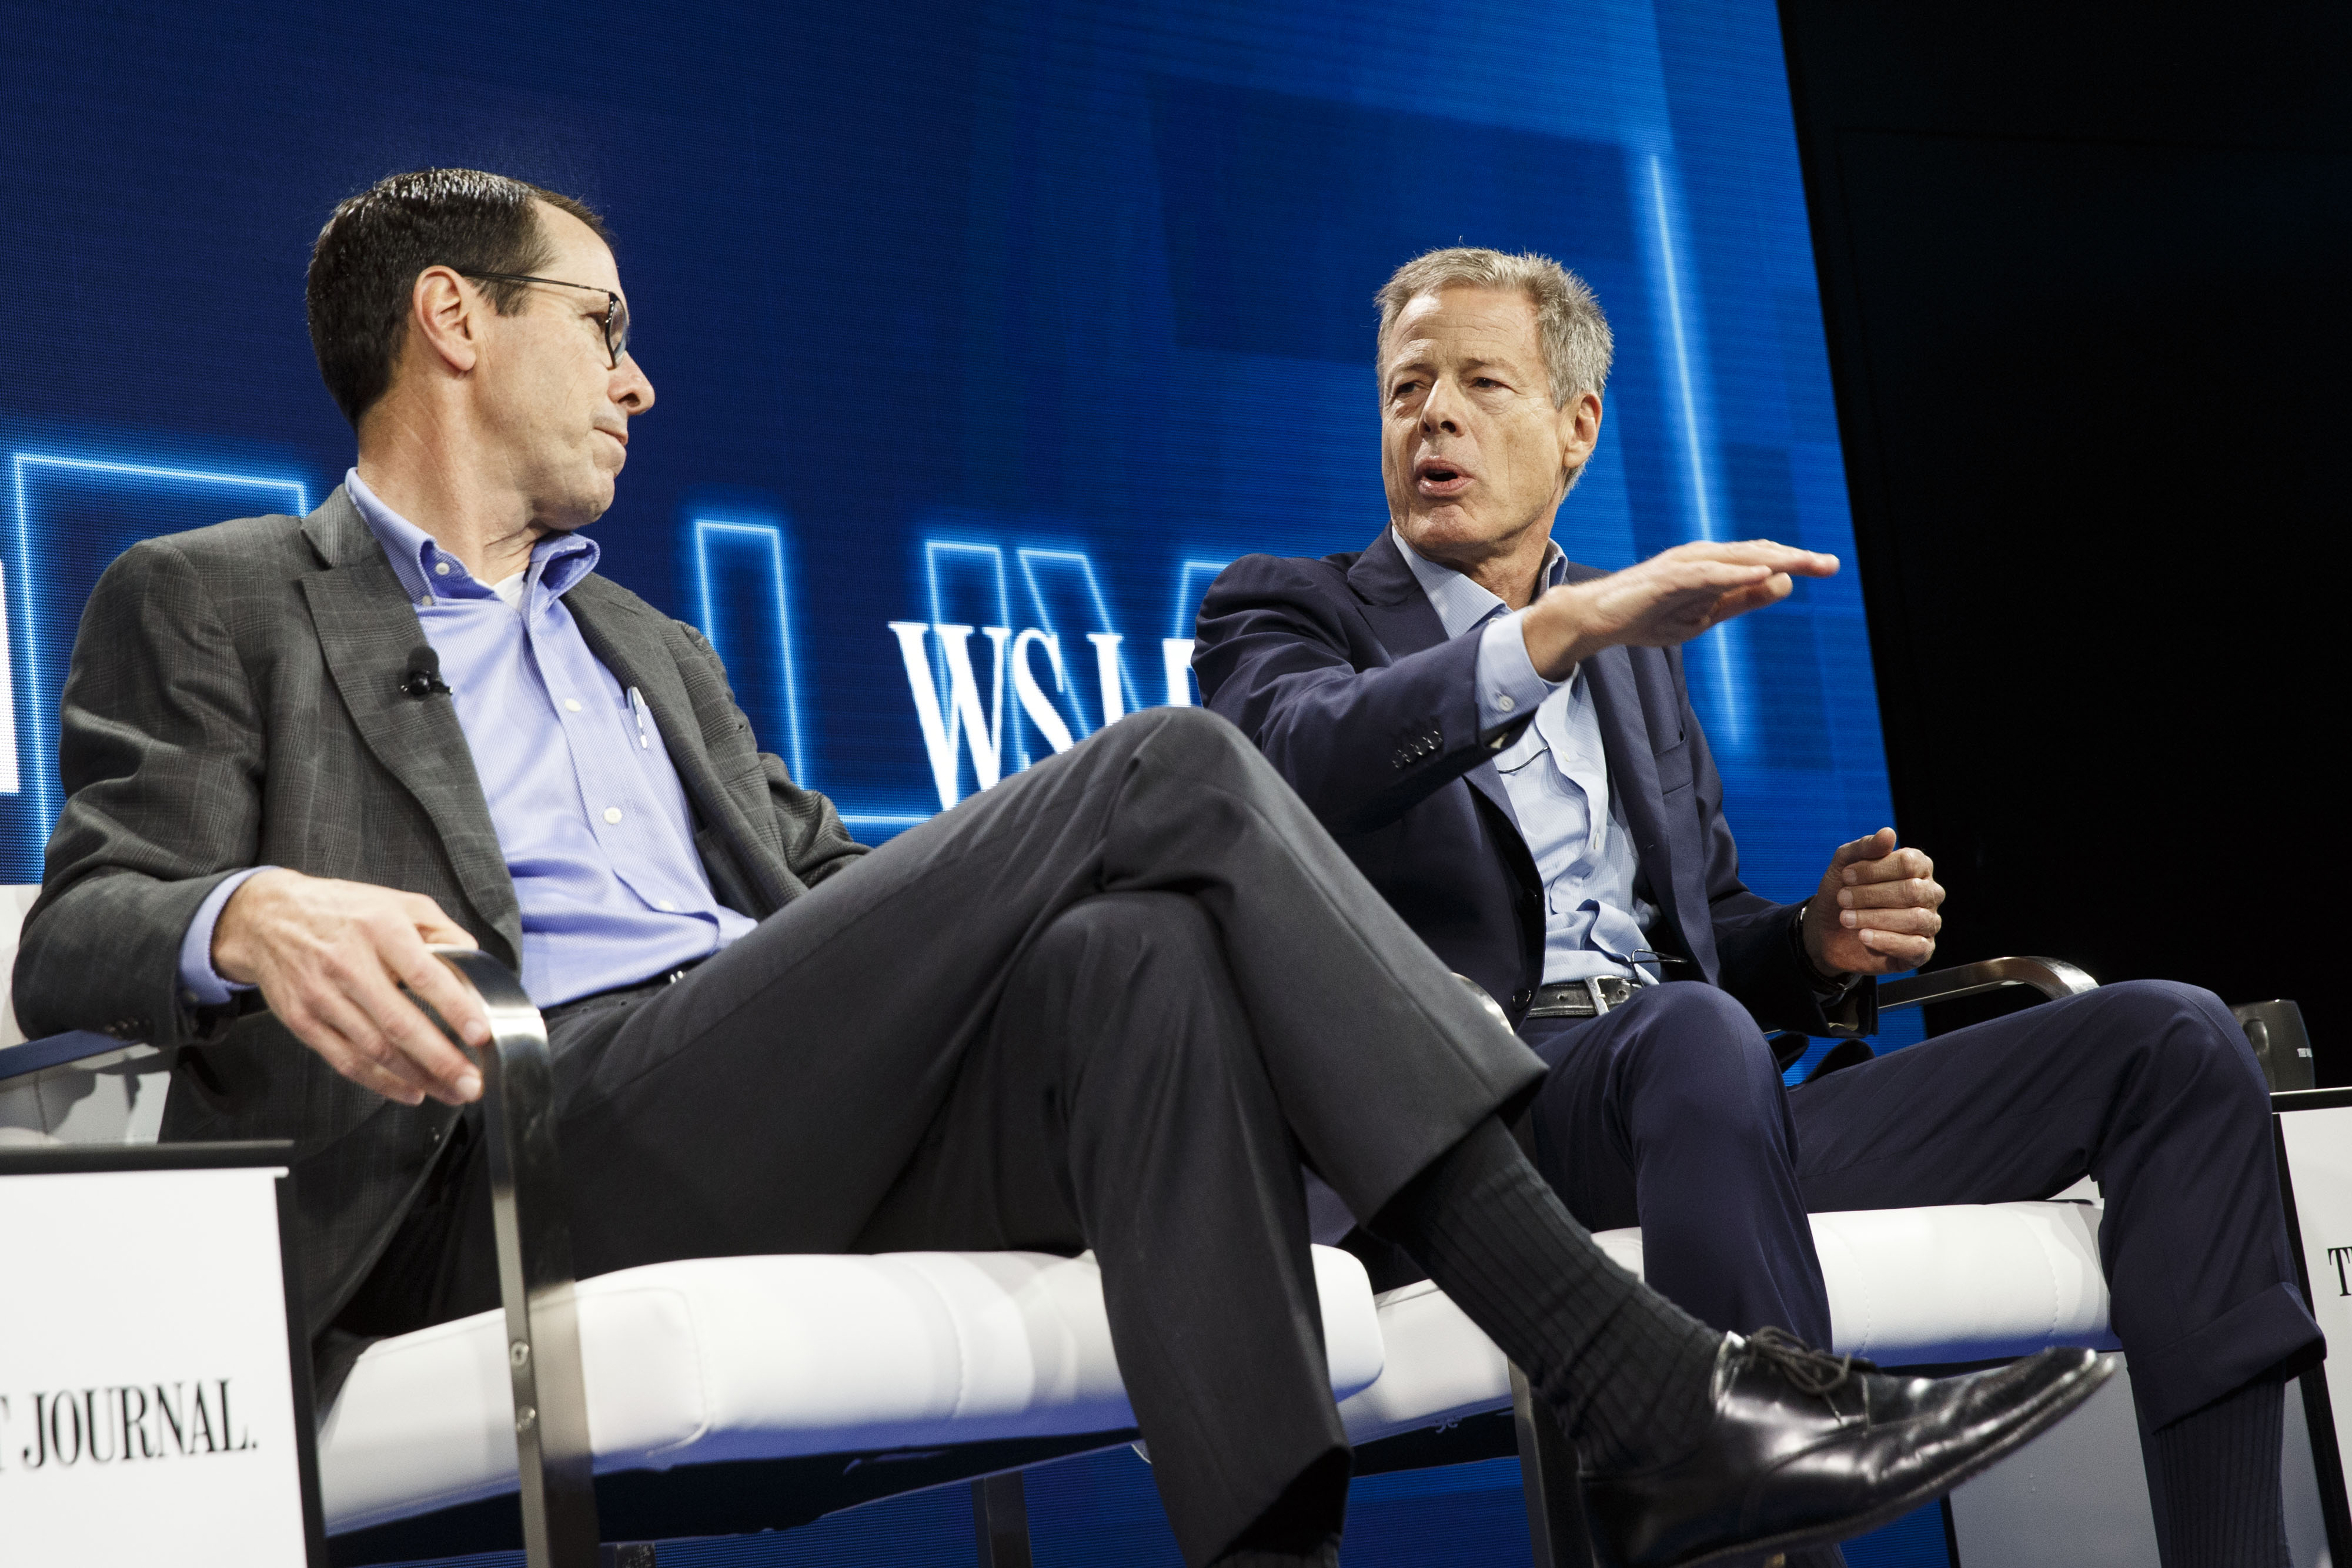 Randall Stephenson, chairman and chief executive officer of AT&amp;T Inc., left, listens while Jeffrey "Jeff" Bewkes, chairman and chief executive officer of Time Warner Inc., speaks during the WSJDLive Global Technology Conference in Laguna Beach, California, U.S., on Tuesday, Oct. 25, 2016. (Bloomberg&mdash;Bloomberg via Getty Images)